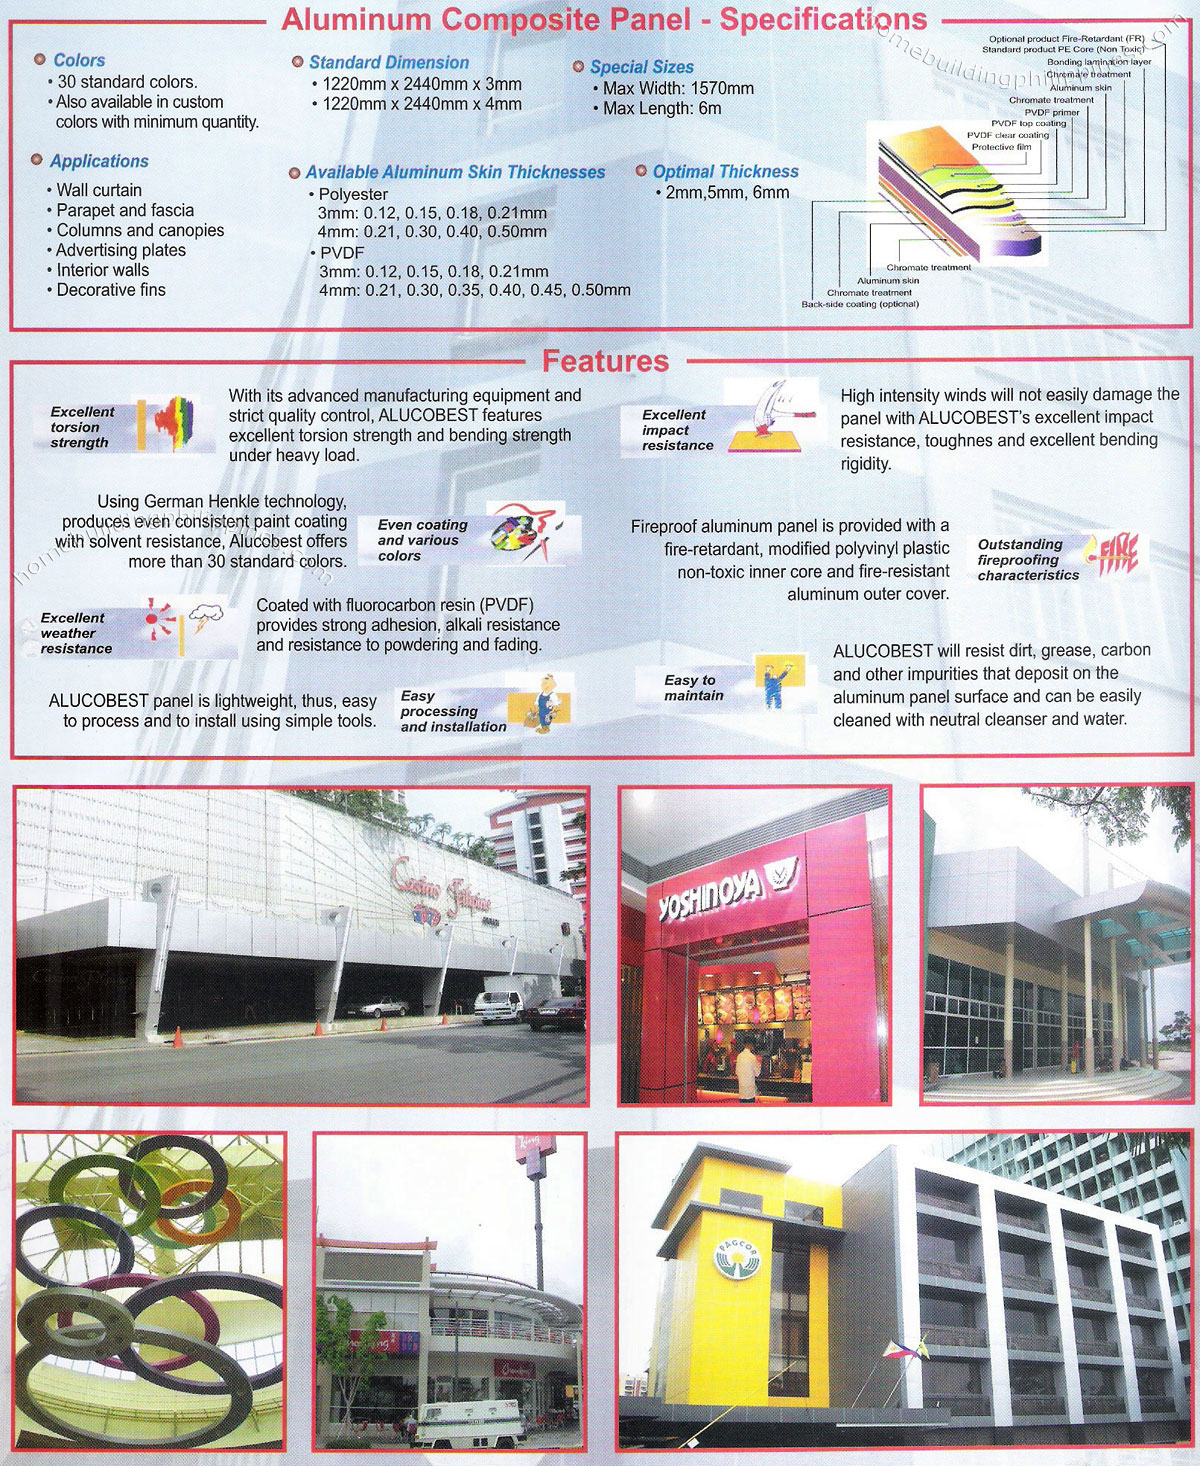 Alucobest Aluminum Wall Cladding Composite Panel Features Specifications